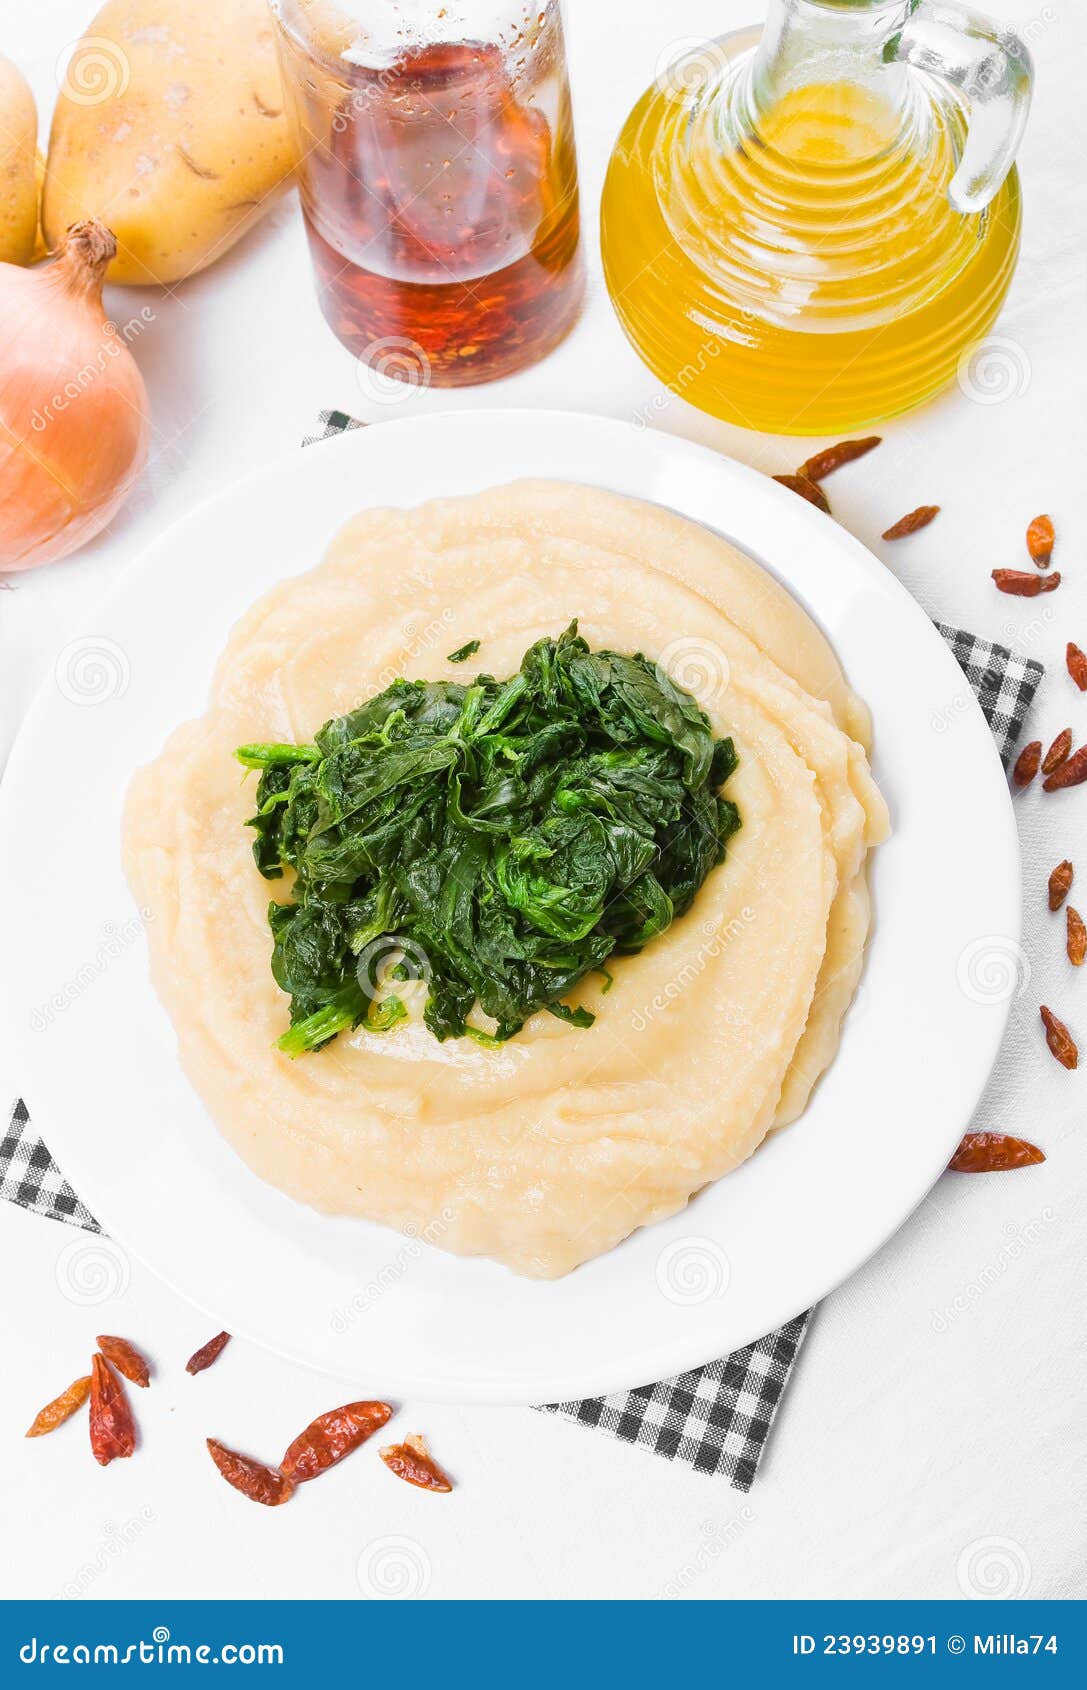 Fava Bean Puree with Spinach. Stock Image - Image of boiled, broad ...